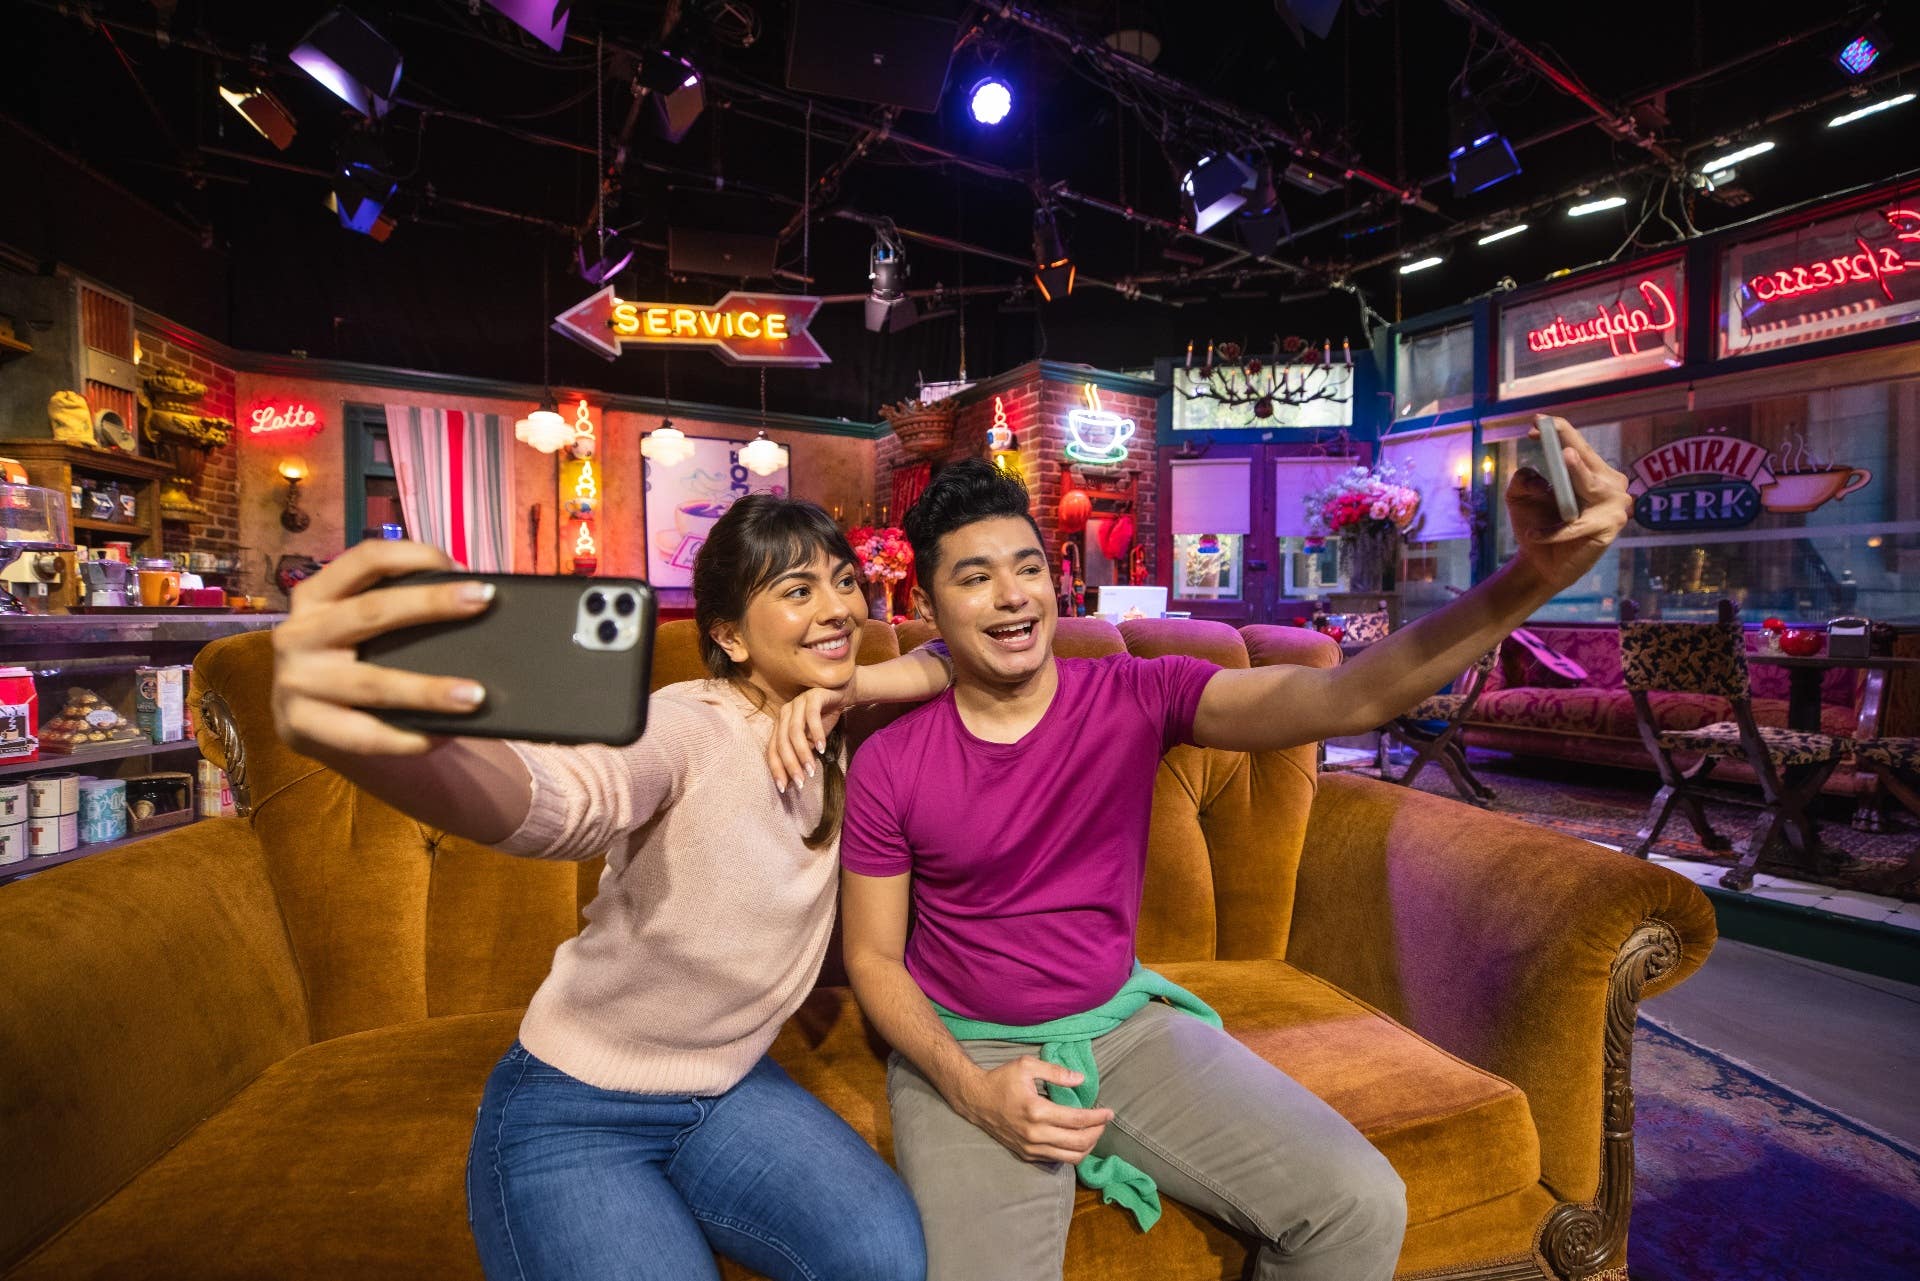 Selfies on the couch of the "Friends" Central Perk Set at Warner Bros. Studio Tour Hollywood